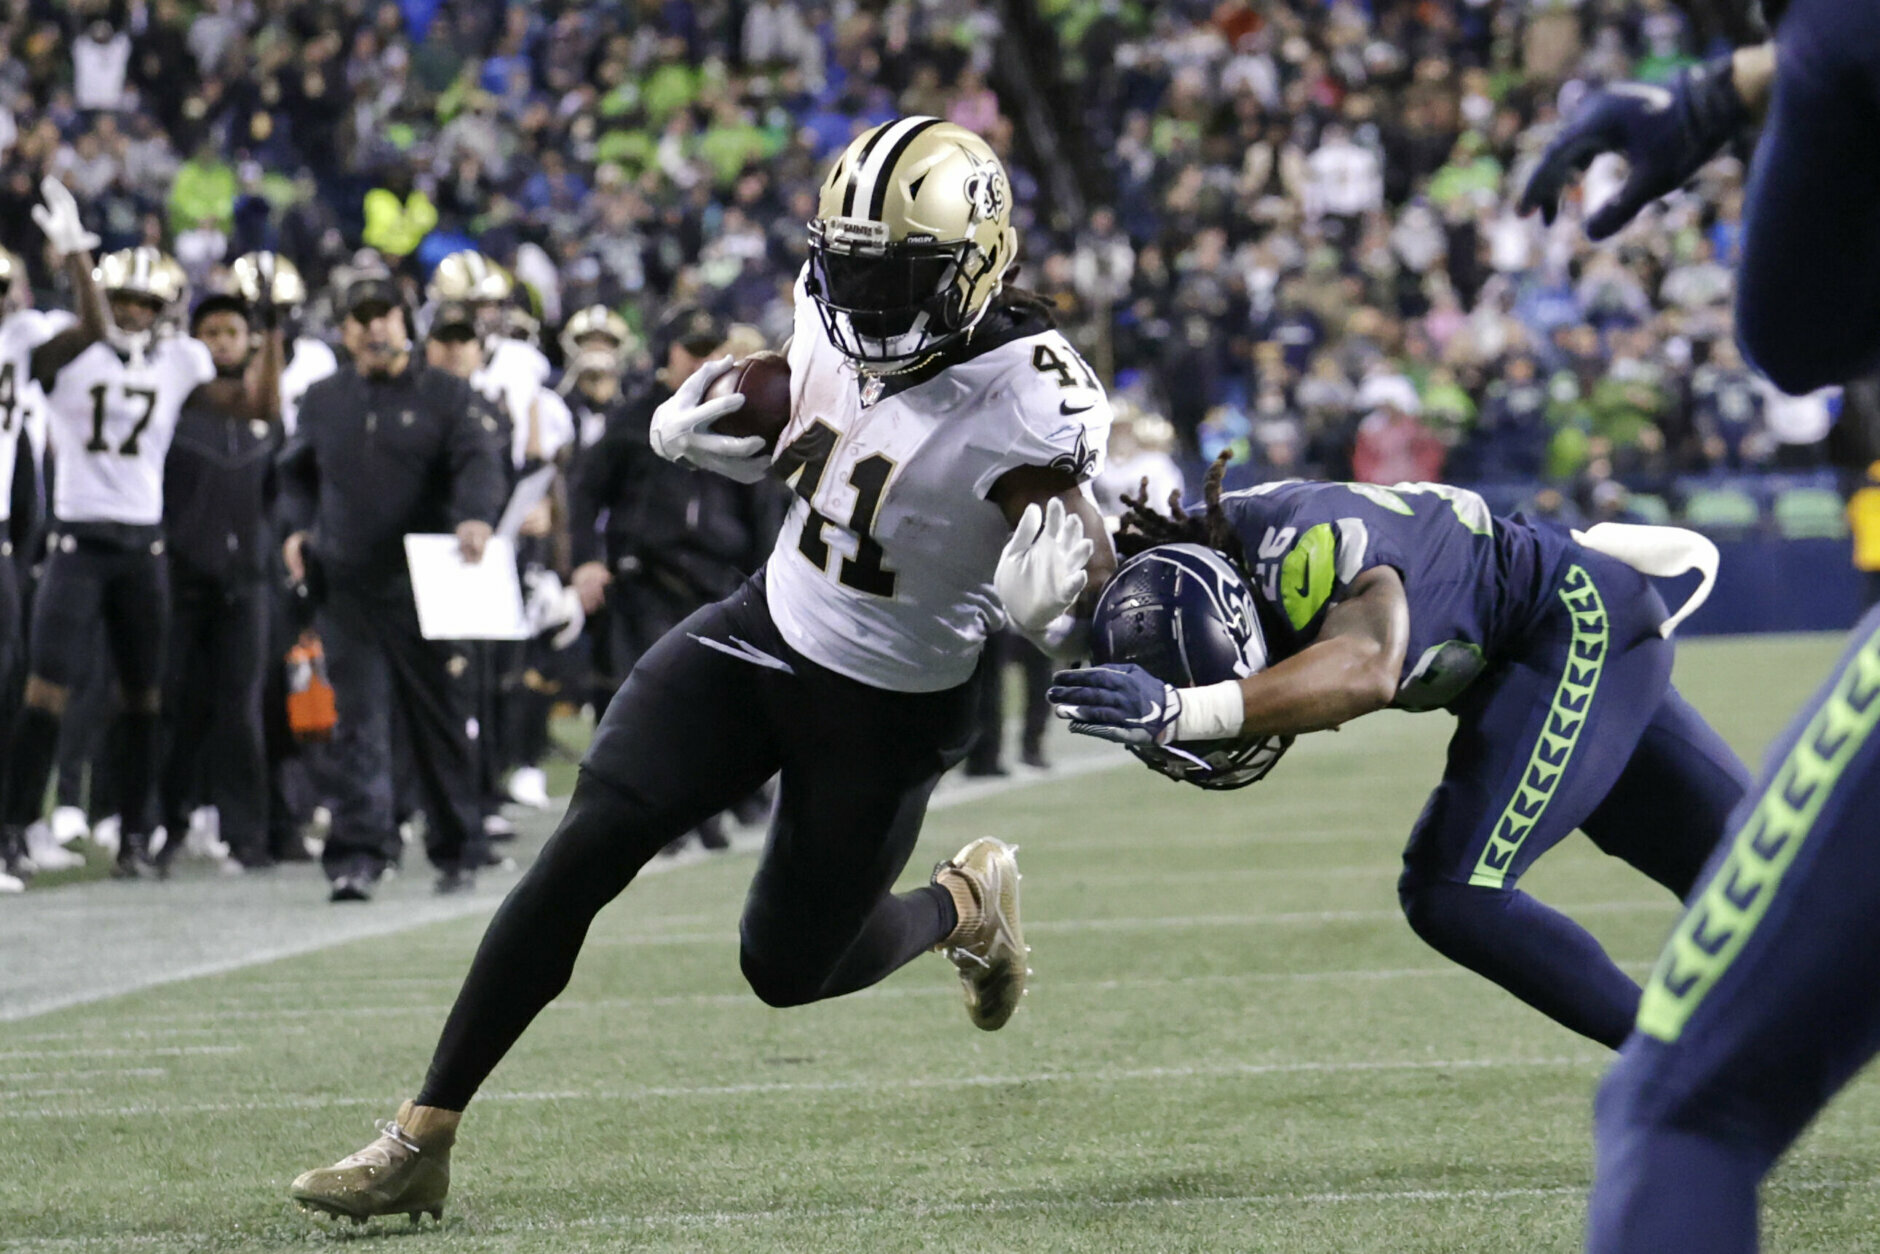 <p><b><i>Saints 13</i></b><br />
<b><i>Seahawks 10</i></b></p>
<p>I don&#8217;t know what was least surprising &#8212; <a href="https://twitter.com/PFTCommenter/status/1452800981331218442?s=20">Marshawn Lynch dropping the F-bomb on live TV</a> in the middle of<a href="https://www.youtube.com/watch?v=w2hOgbq2myA"> the Beast Quake Rematch</a> or New Orleans taking full advantage of Russell Wilson&#8217;s absence. Without Russ, Seattle is 0-3 at home for the first time since 1992 and their streak of four straight wins on Monday Night Football is over. If the Seahawks can&#8217;t manage a home win over the putrid Jaguars Sunday, Wilson might just win his first MVP for being absent.</p>
<p>But seriously, can we get Beast Mode in a booth somewhere? This man is straight up gold.</p>
<p>https://twitter.com/PFF/status/1452797436523687943?s=20</p>
